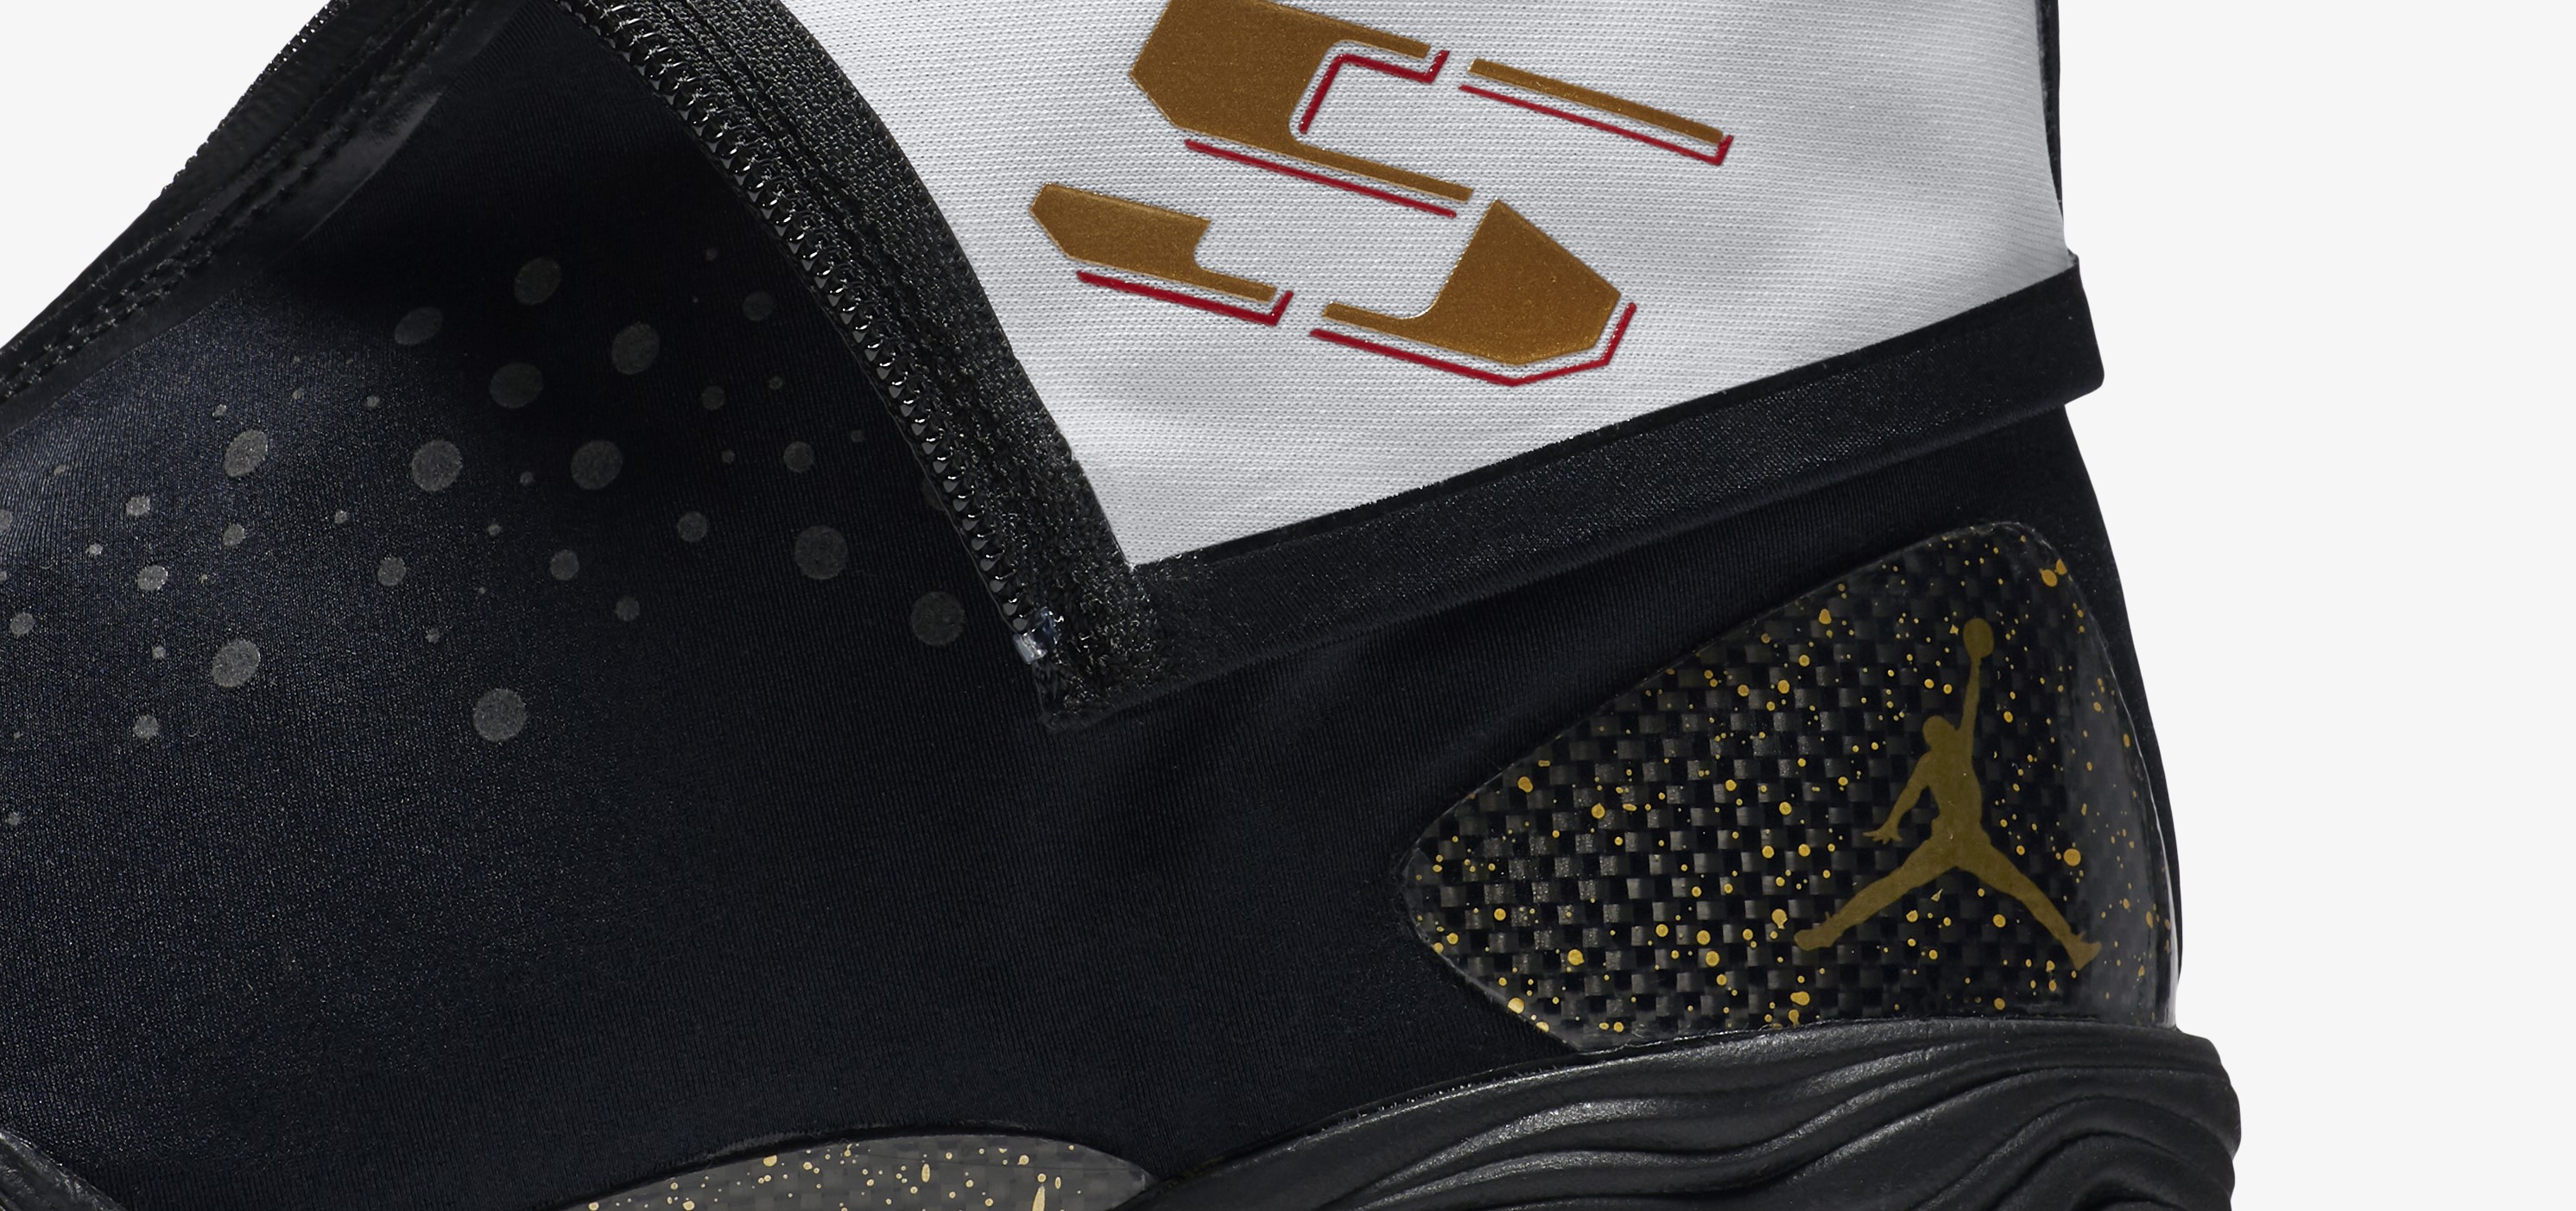 Vacante Muslo Paleto The Air Jordan 28 'Locked and Loaded' Honors Ray Allen's Knockout Shooting  in the 2013 NBA Finals - WearTesters